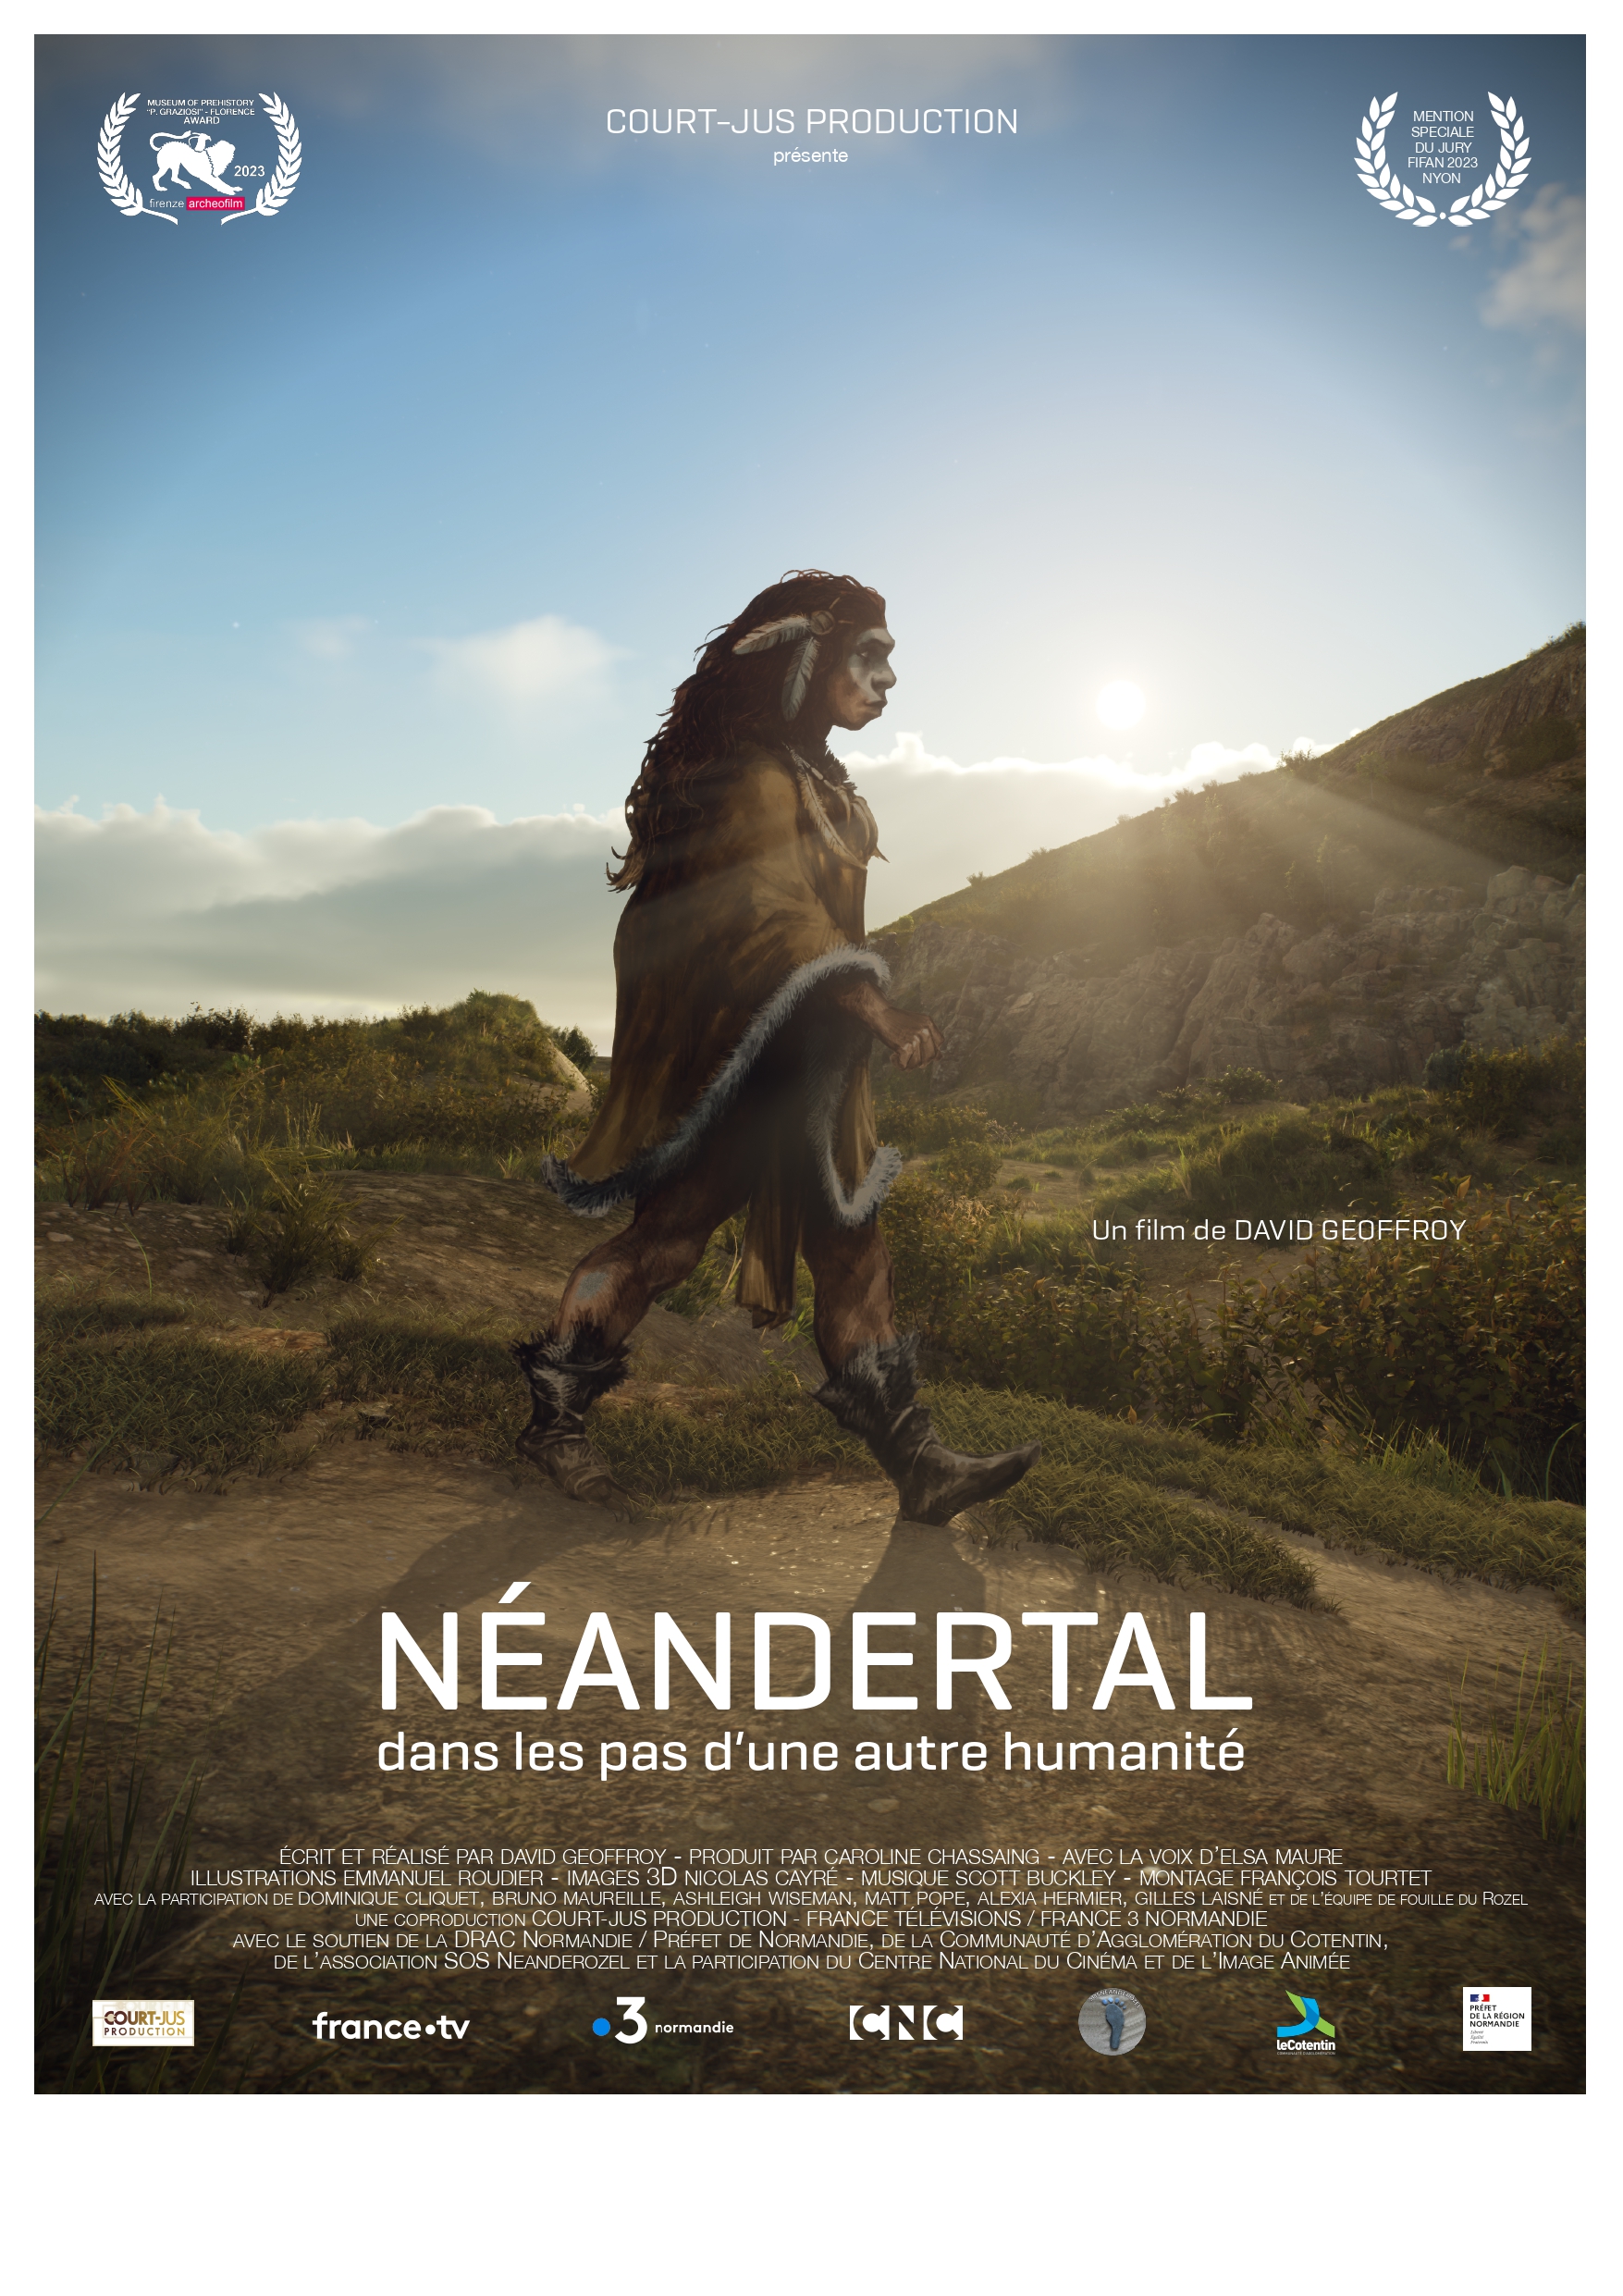 Neanderthal in the footsteps of another humanity